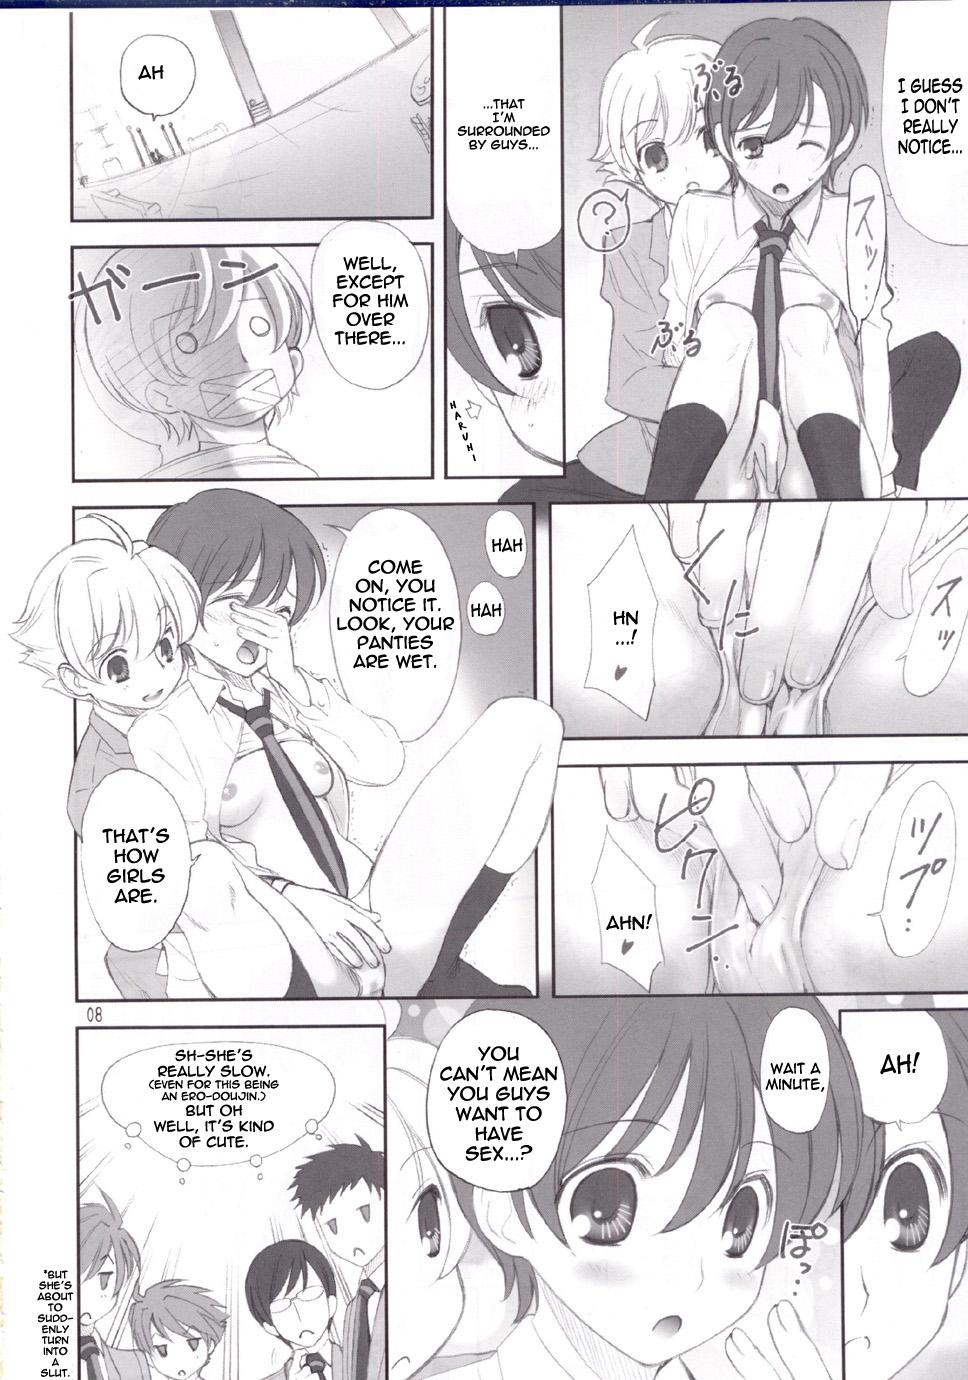 Spain Ukon - Ouran high school host club Chick - Page 8